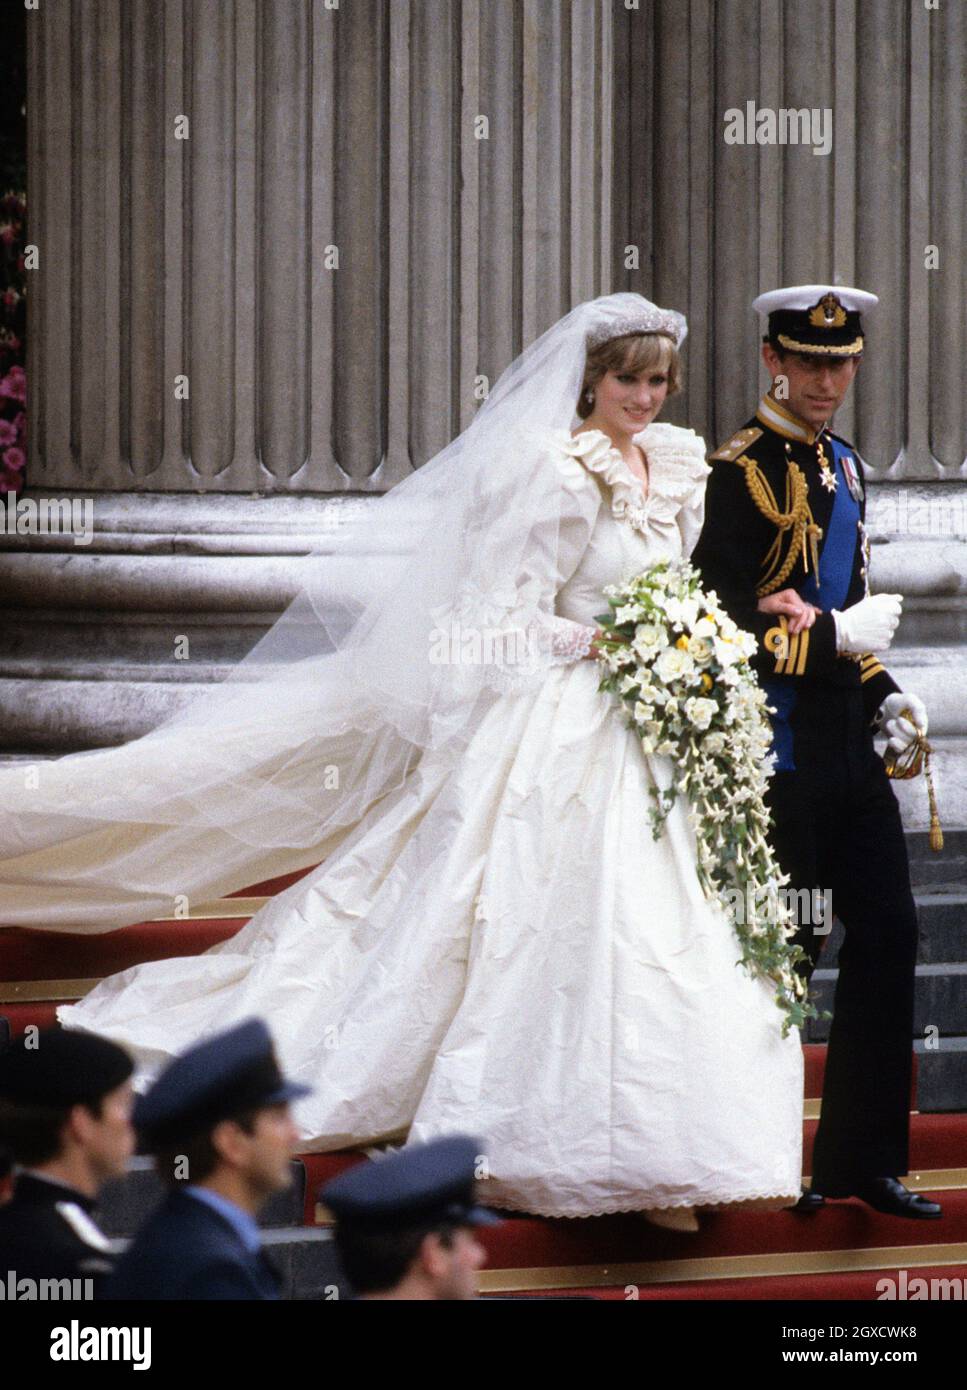 **FILE PHOTO** Diana, Princess of Wales, wearing an Emanuel wedding dress, and Prince Charles, Prince of Wales leave St. Paul's Cathedral following their wedding on 29 July 1981. Designers Elizabeth and David Emanuel are holding an auction of dresses worn by the late Princess Diana. The dresses are to go up for auction on June 8, 2010 in London, at specialist vintage fashion auctioneers Kerry Taylor Auctions.  Stock Photo